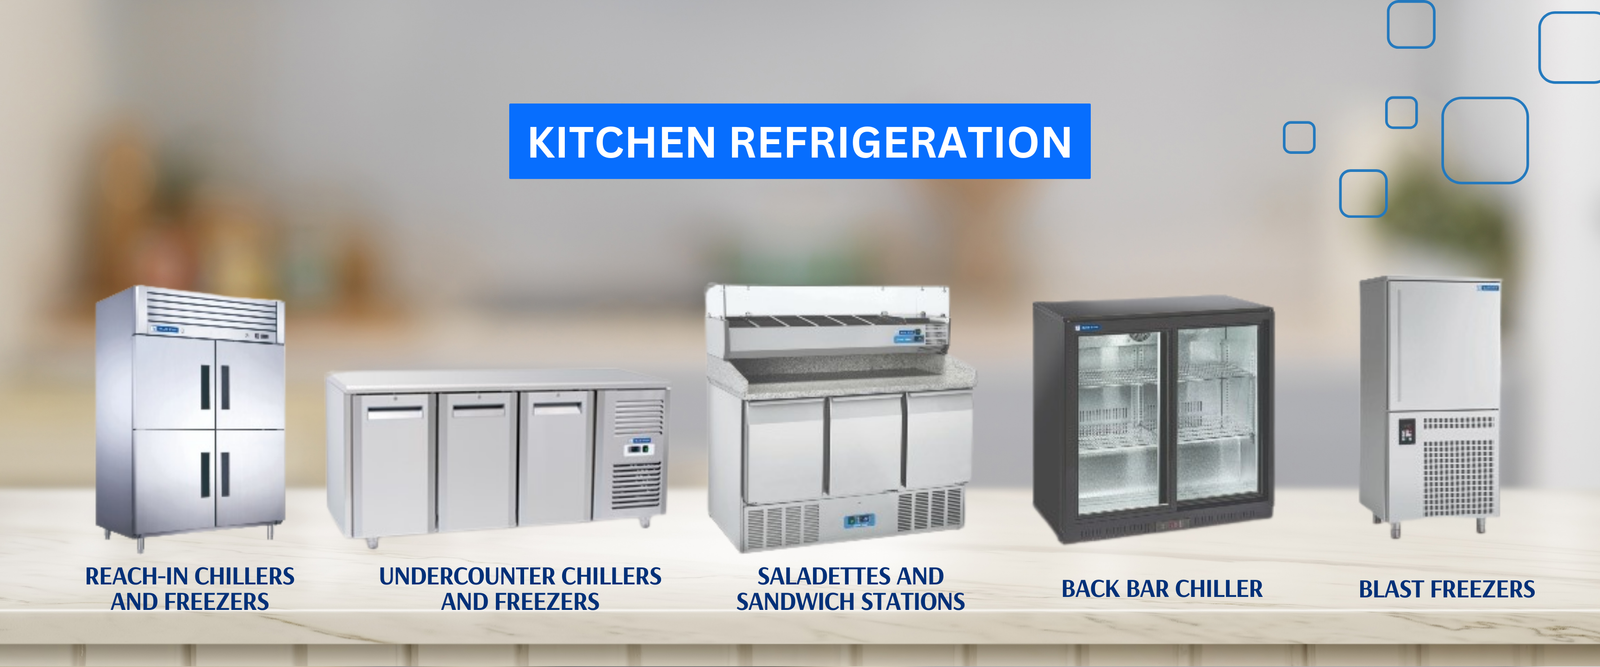 Refrigerator for commercial kitchen